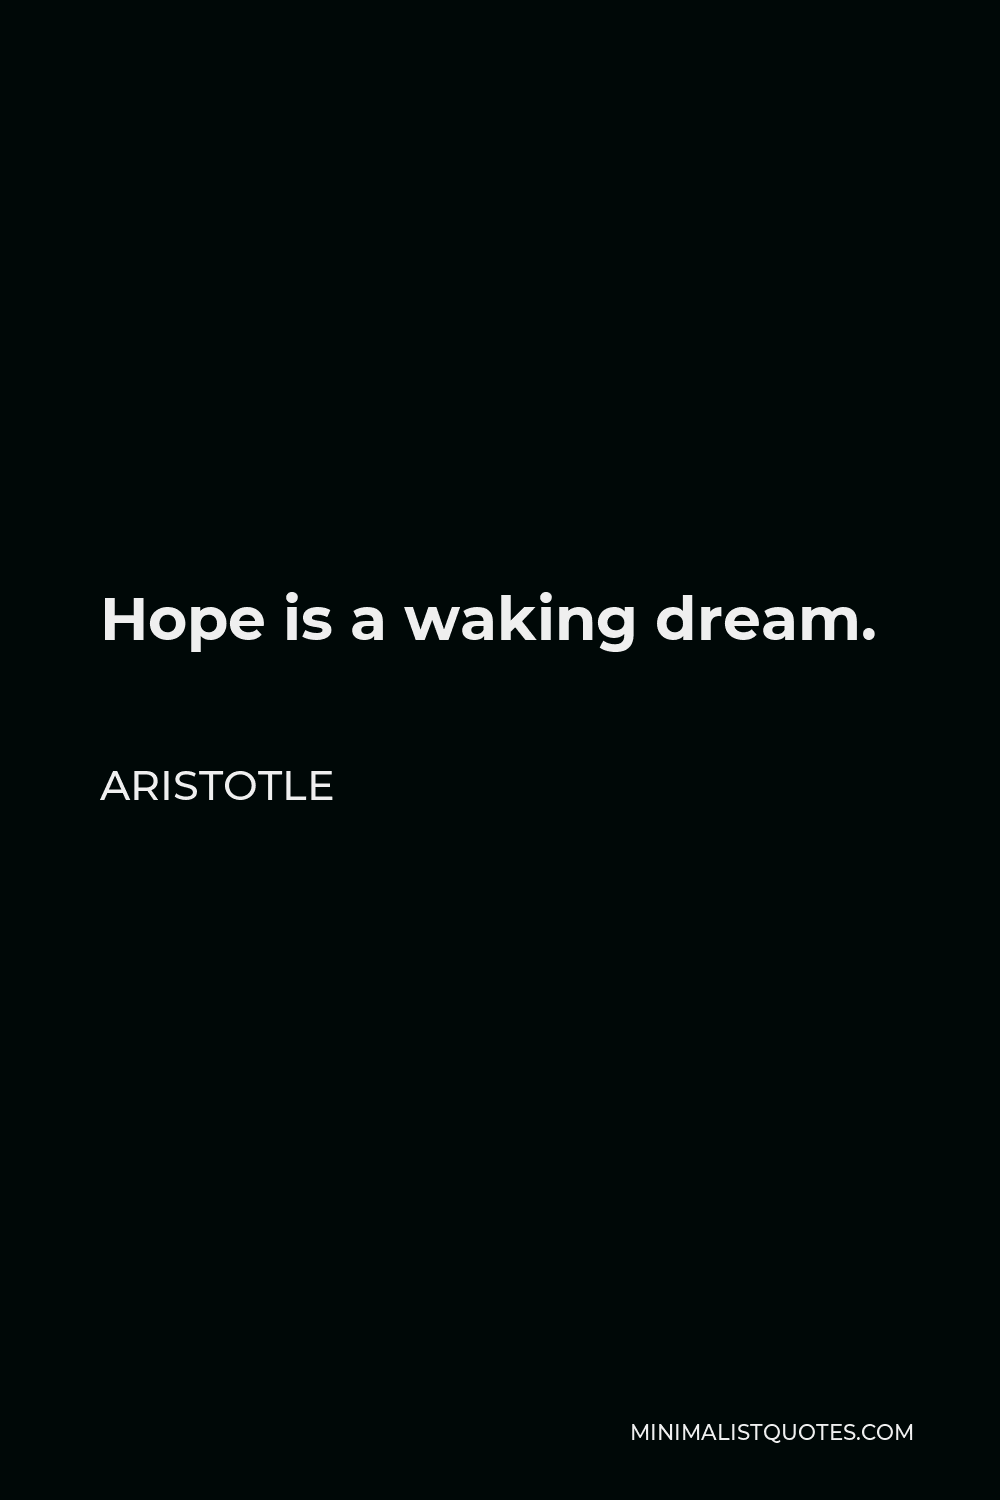 Aristotle Quote - Hope is a waking dream.